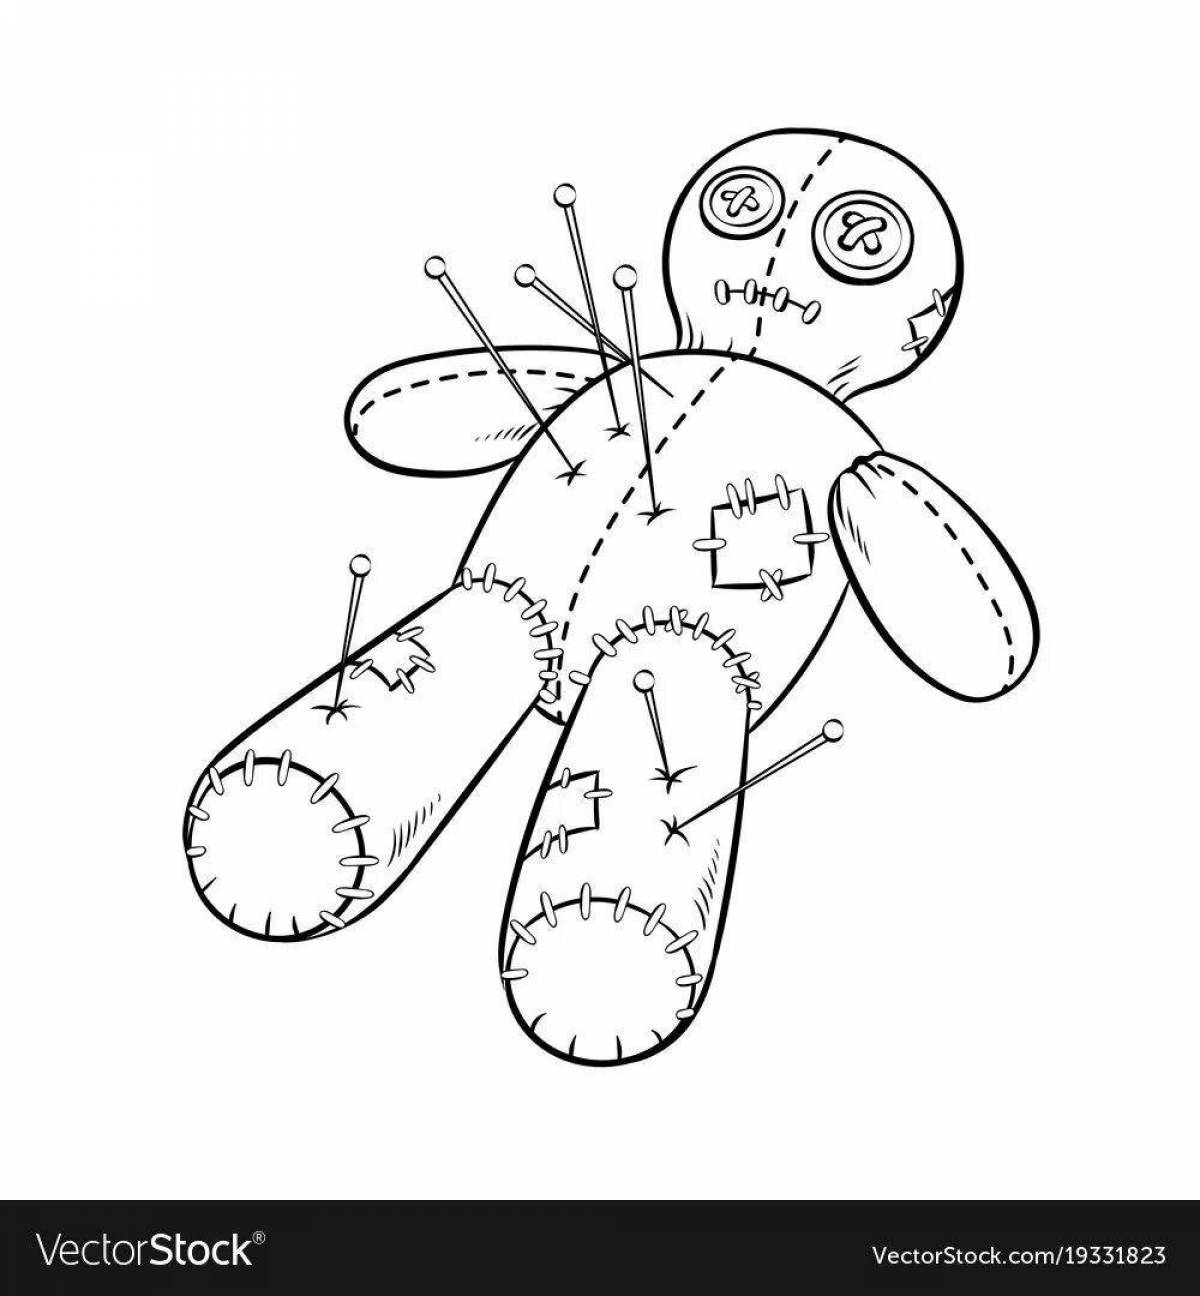 Gorgeous voodoo doll coloring page